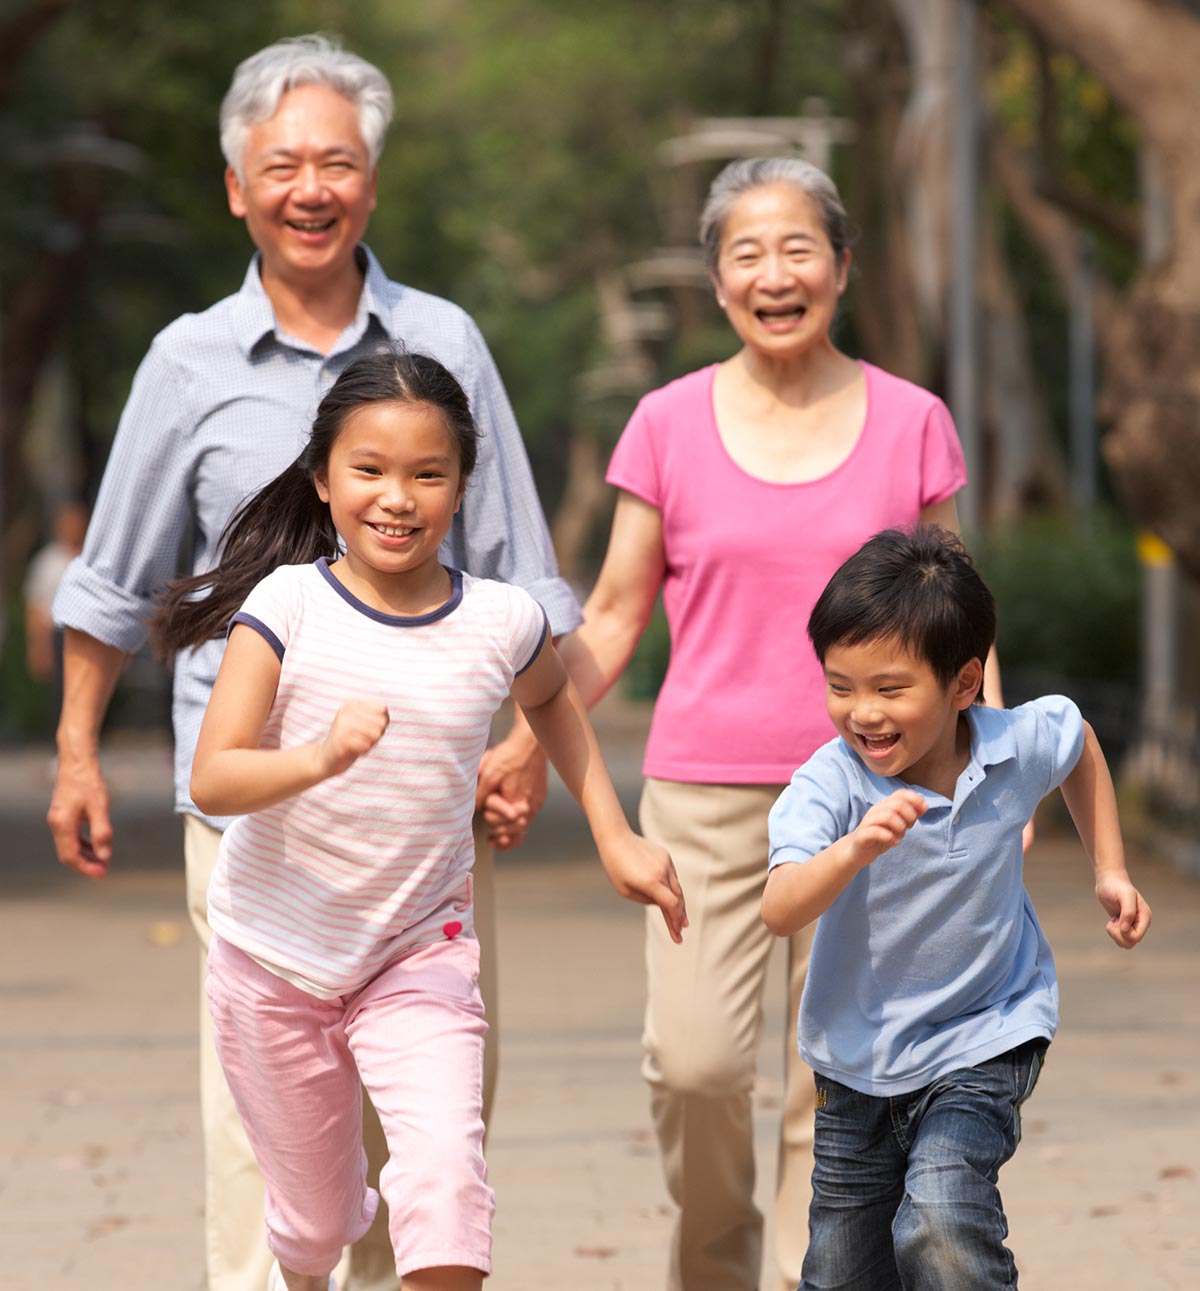 Photo of two happy children running on a path in front of their grandparents.